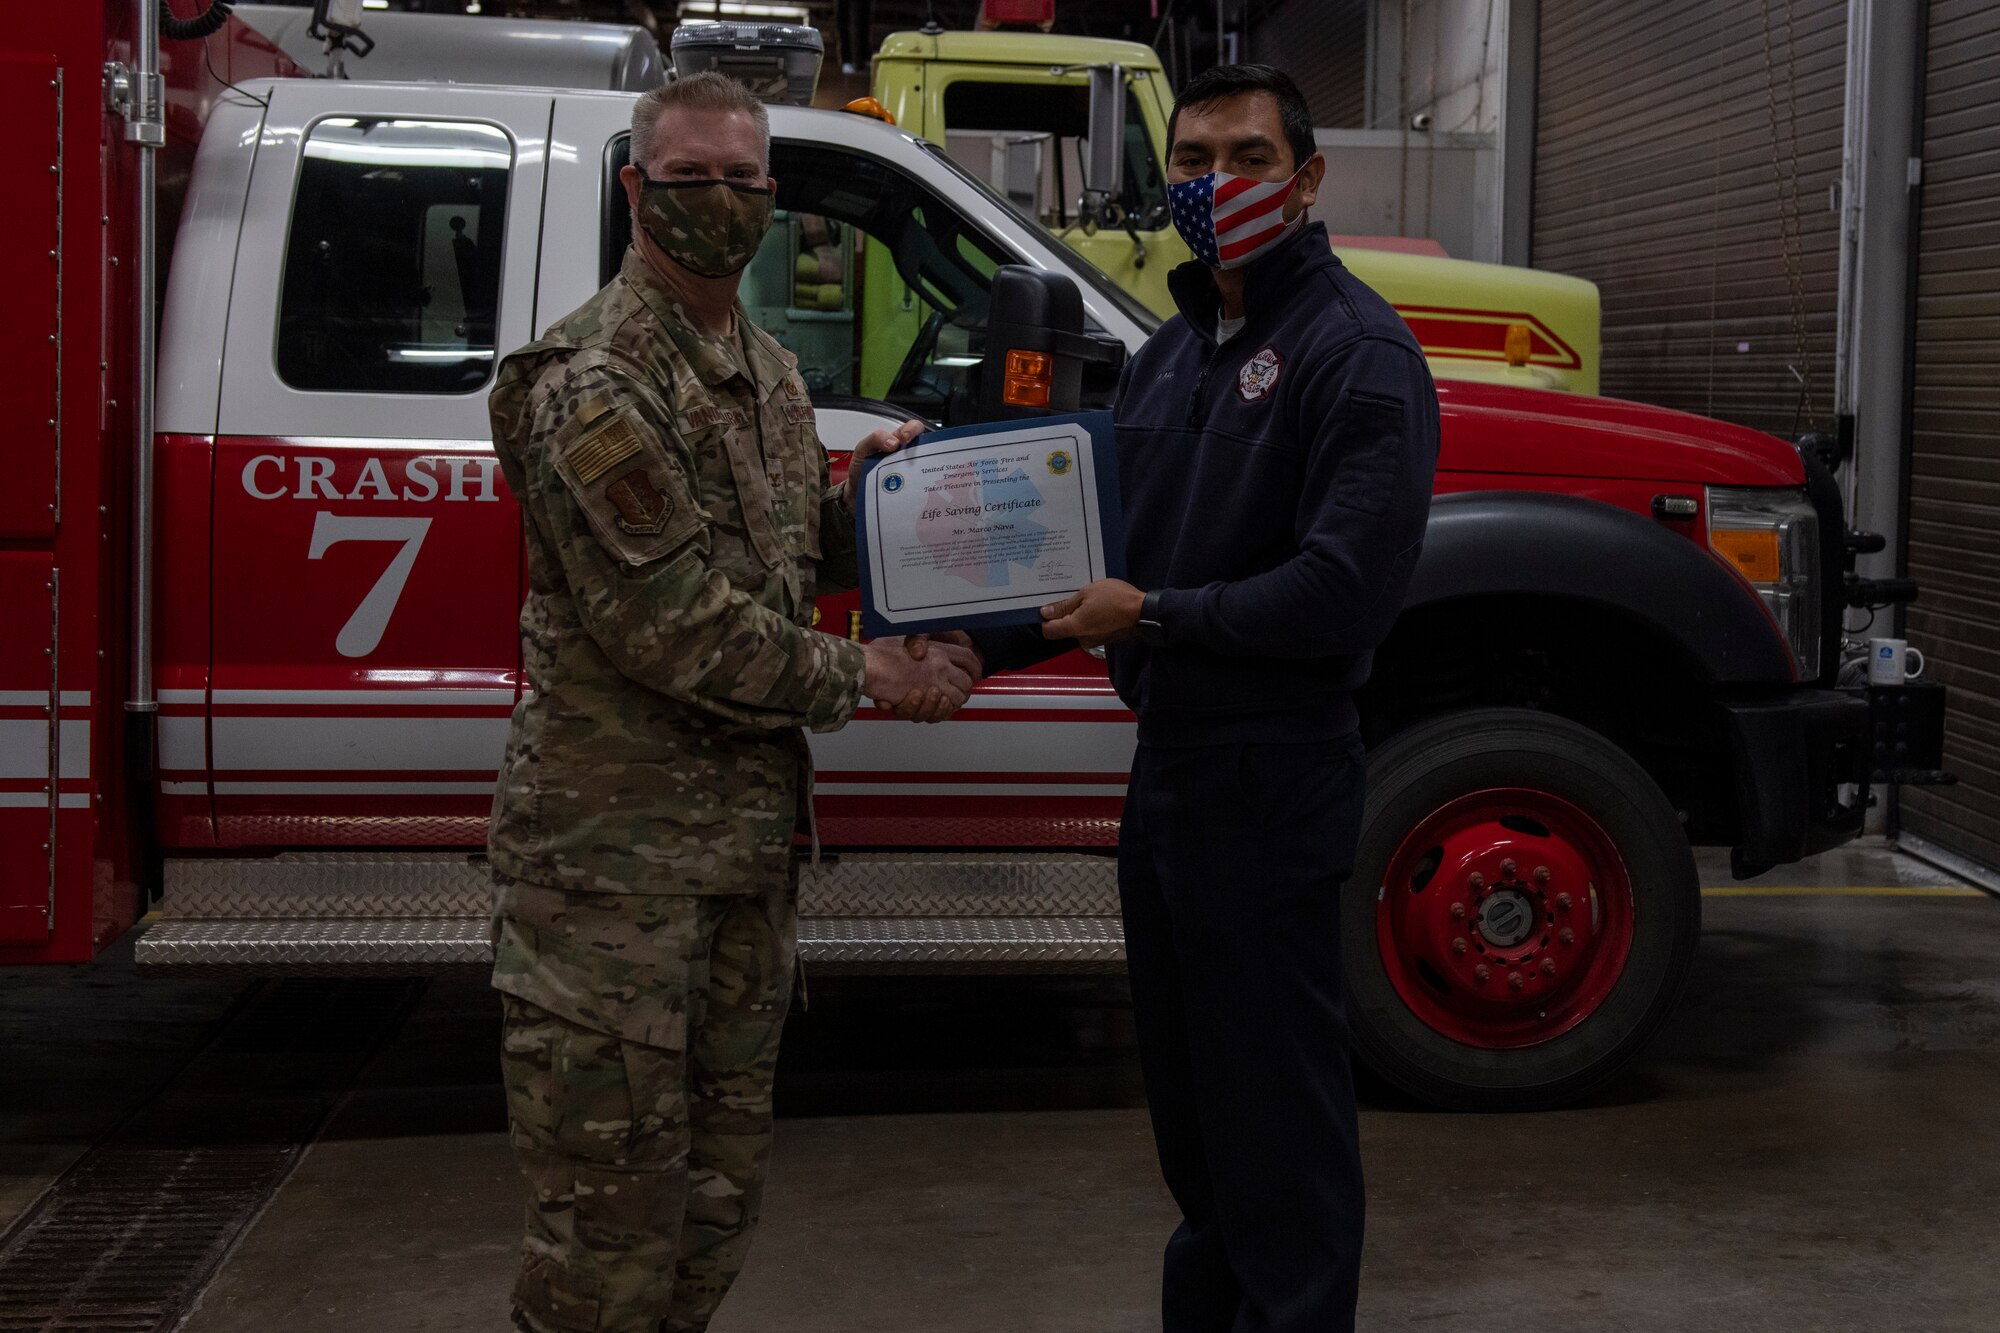 Mr. Marco Nava, 97th Civil Engineer Squadron (CES) Fire and Emergency Services Flight firefighter, poses with Col. David Vanderburg, 97th Mission Support Group commander, at Altus Air Force Base, Oklahoma, Jan. 13, 2022. This is the first time any member of Altus Air Force Base’s Fire and Emergency Services Flight has personally received an Air Force level award. (U.S. Air Force photo by Airman 1st Class Miyah Gray)